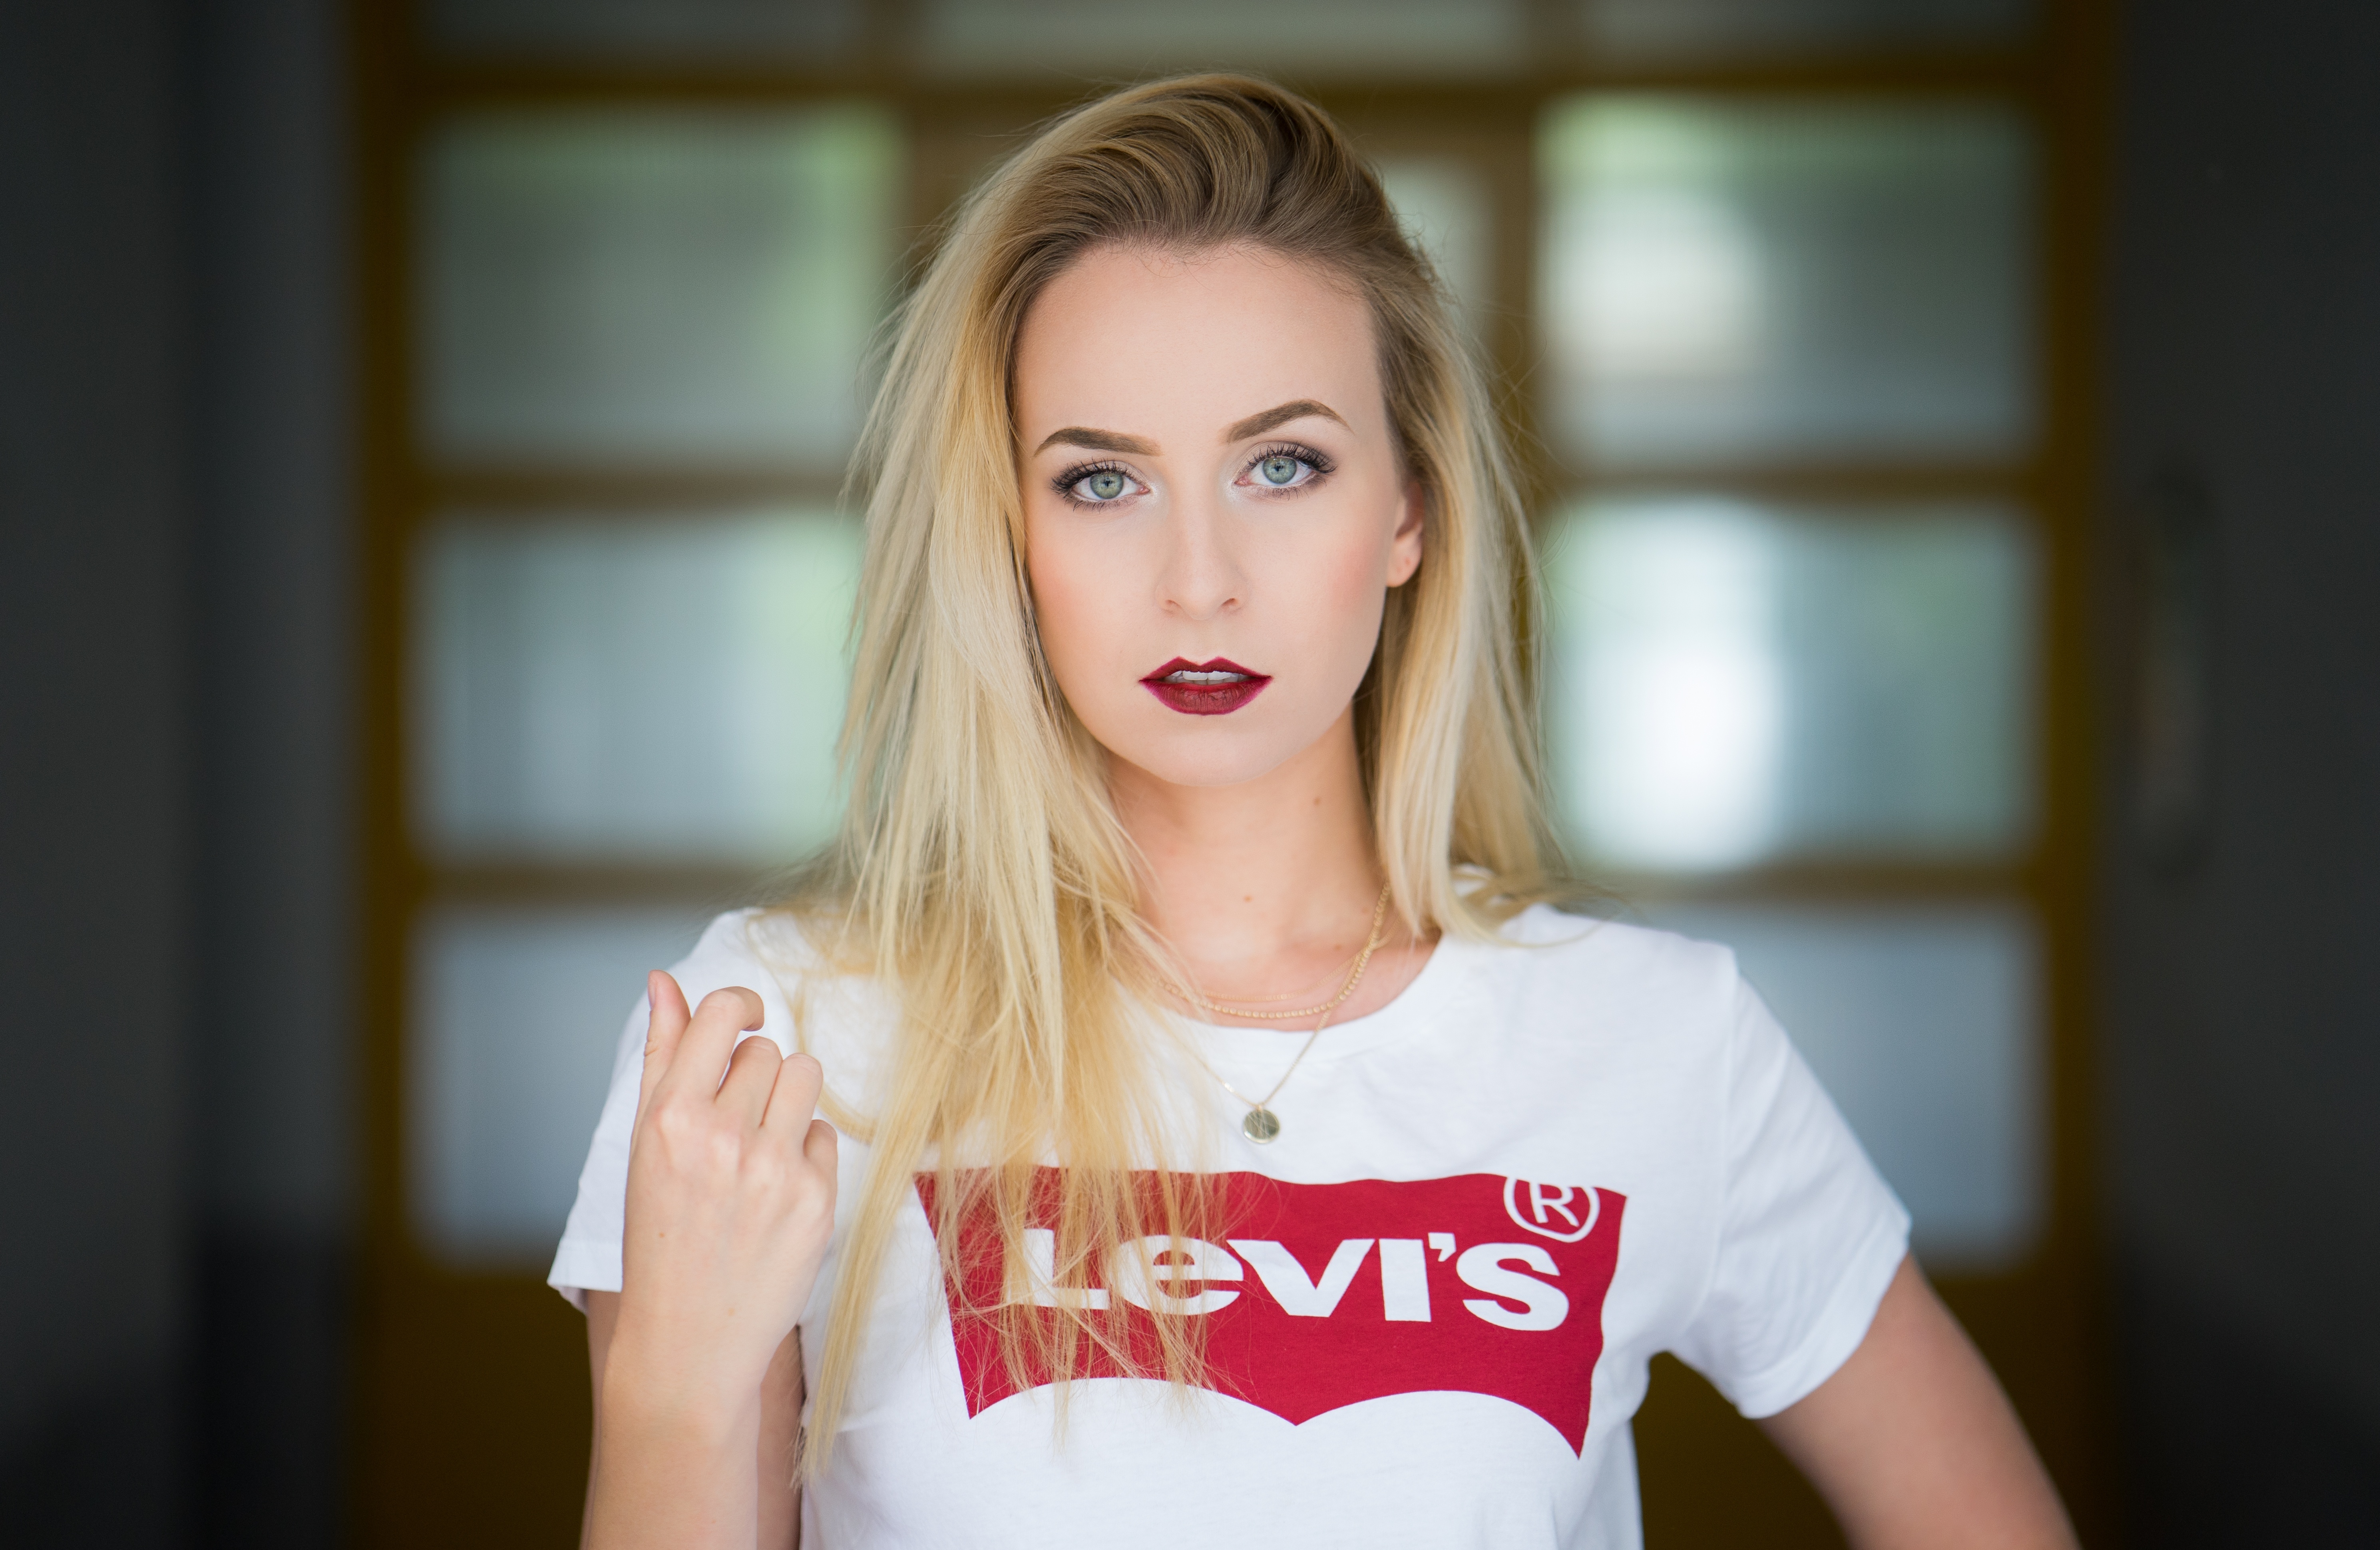 Women Blonde Blue Eyes Red Lipstick Open Mouth White T Shirt Necklace Levis Looking At Viewer Portra 5956x3879